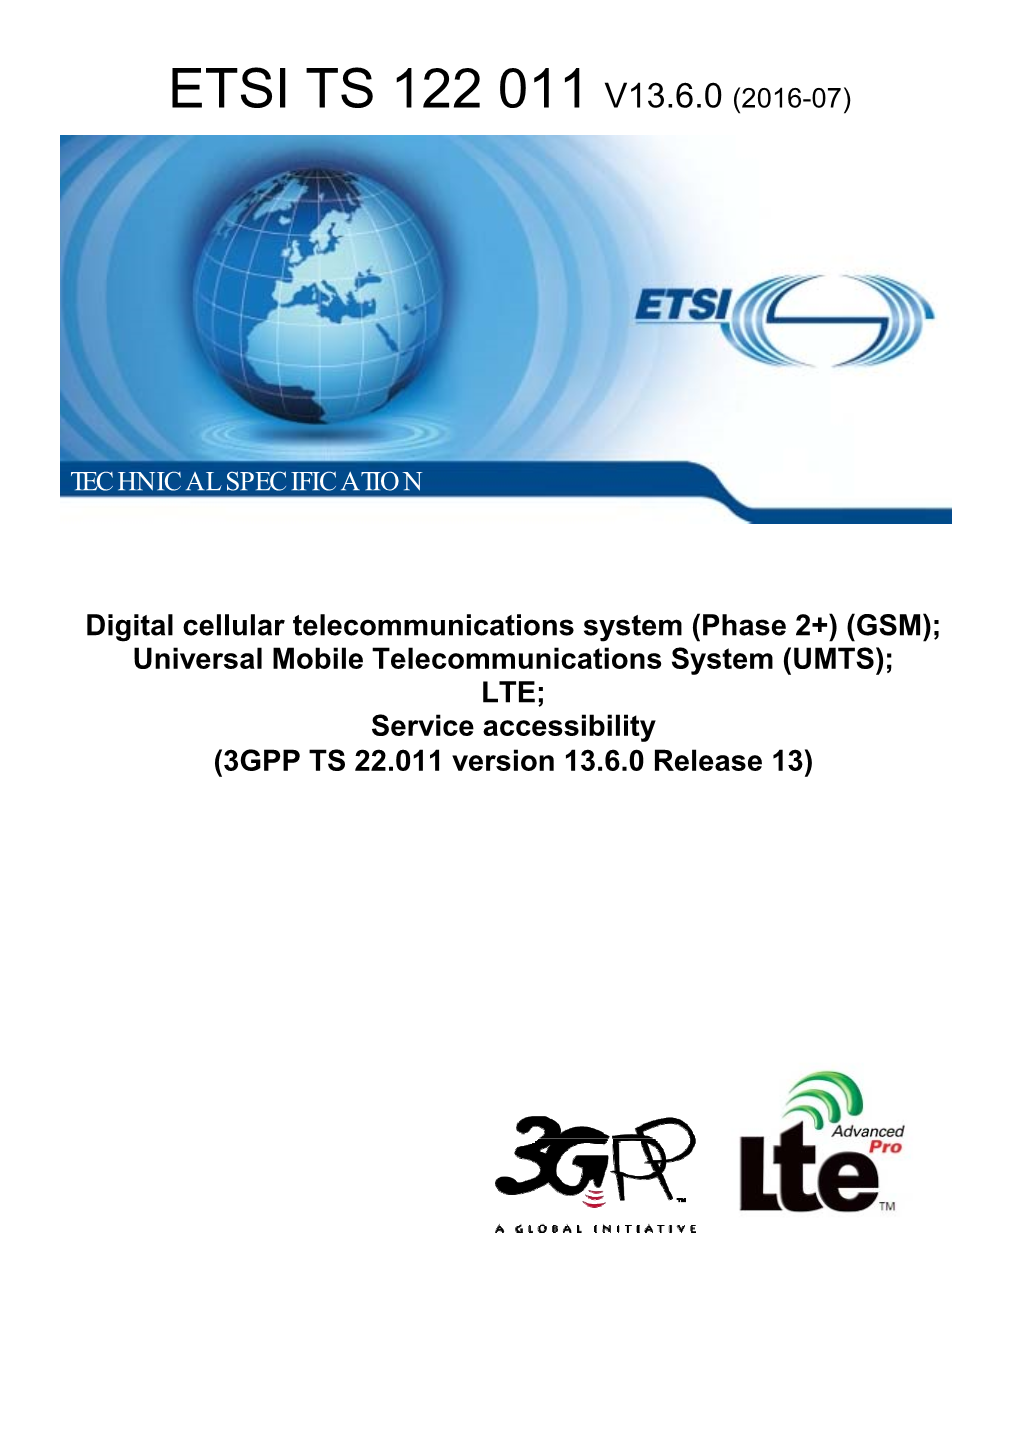 GSM); Universal Mobile Telelecommunications System ((UMTS); LTE; Serervice Accessibility (3GPP TS 22.0.011 Version 13.6.0 Release 13)